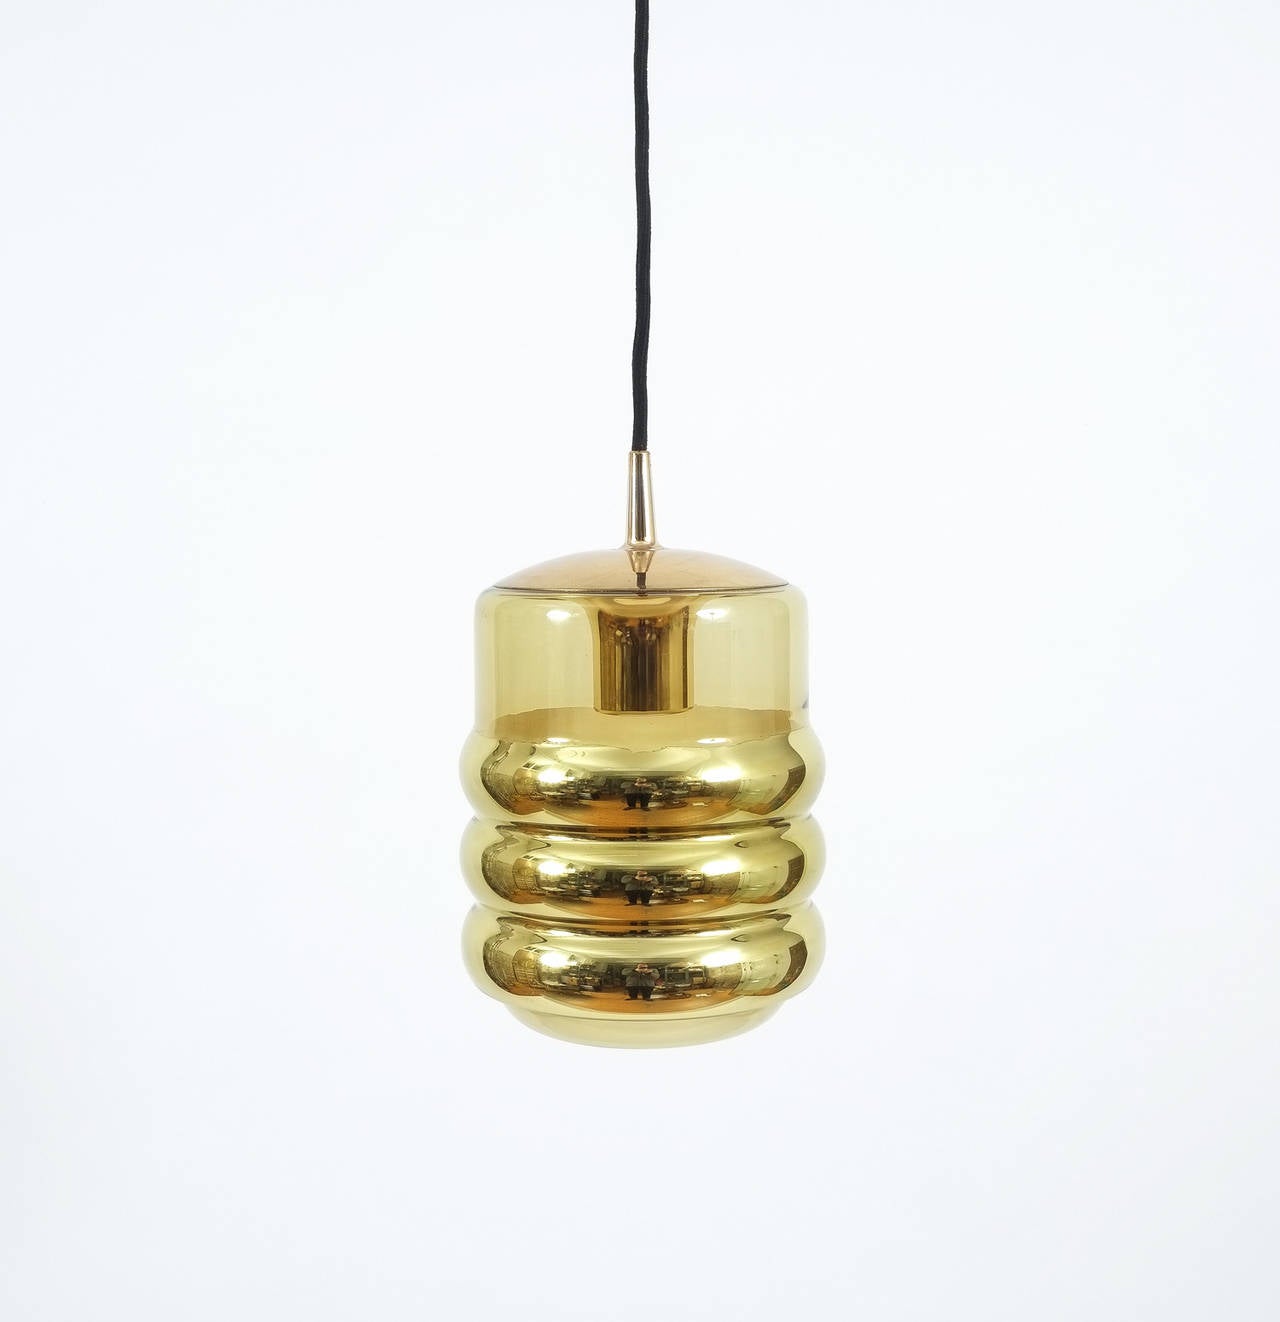 German Three Staff Golden Glass Pendant Lamps with Black Cord Wire, 1970